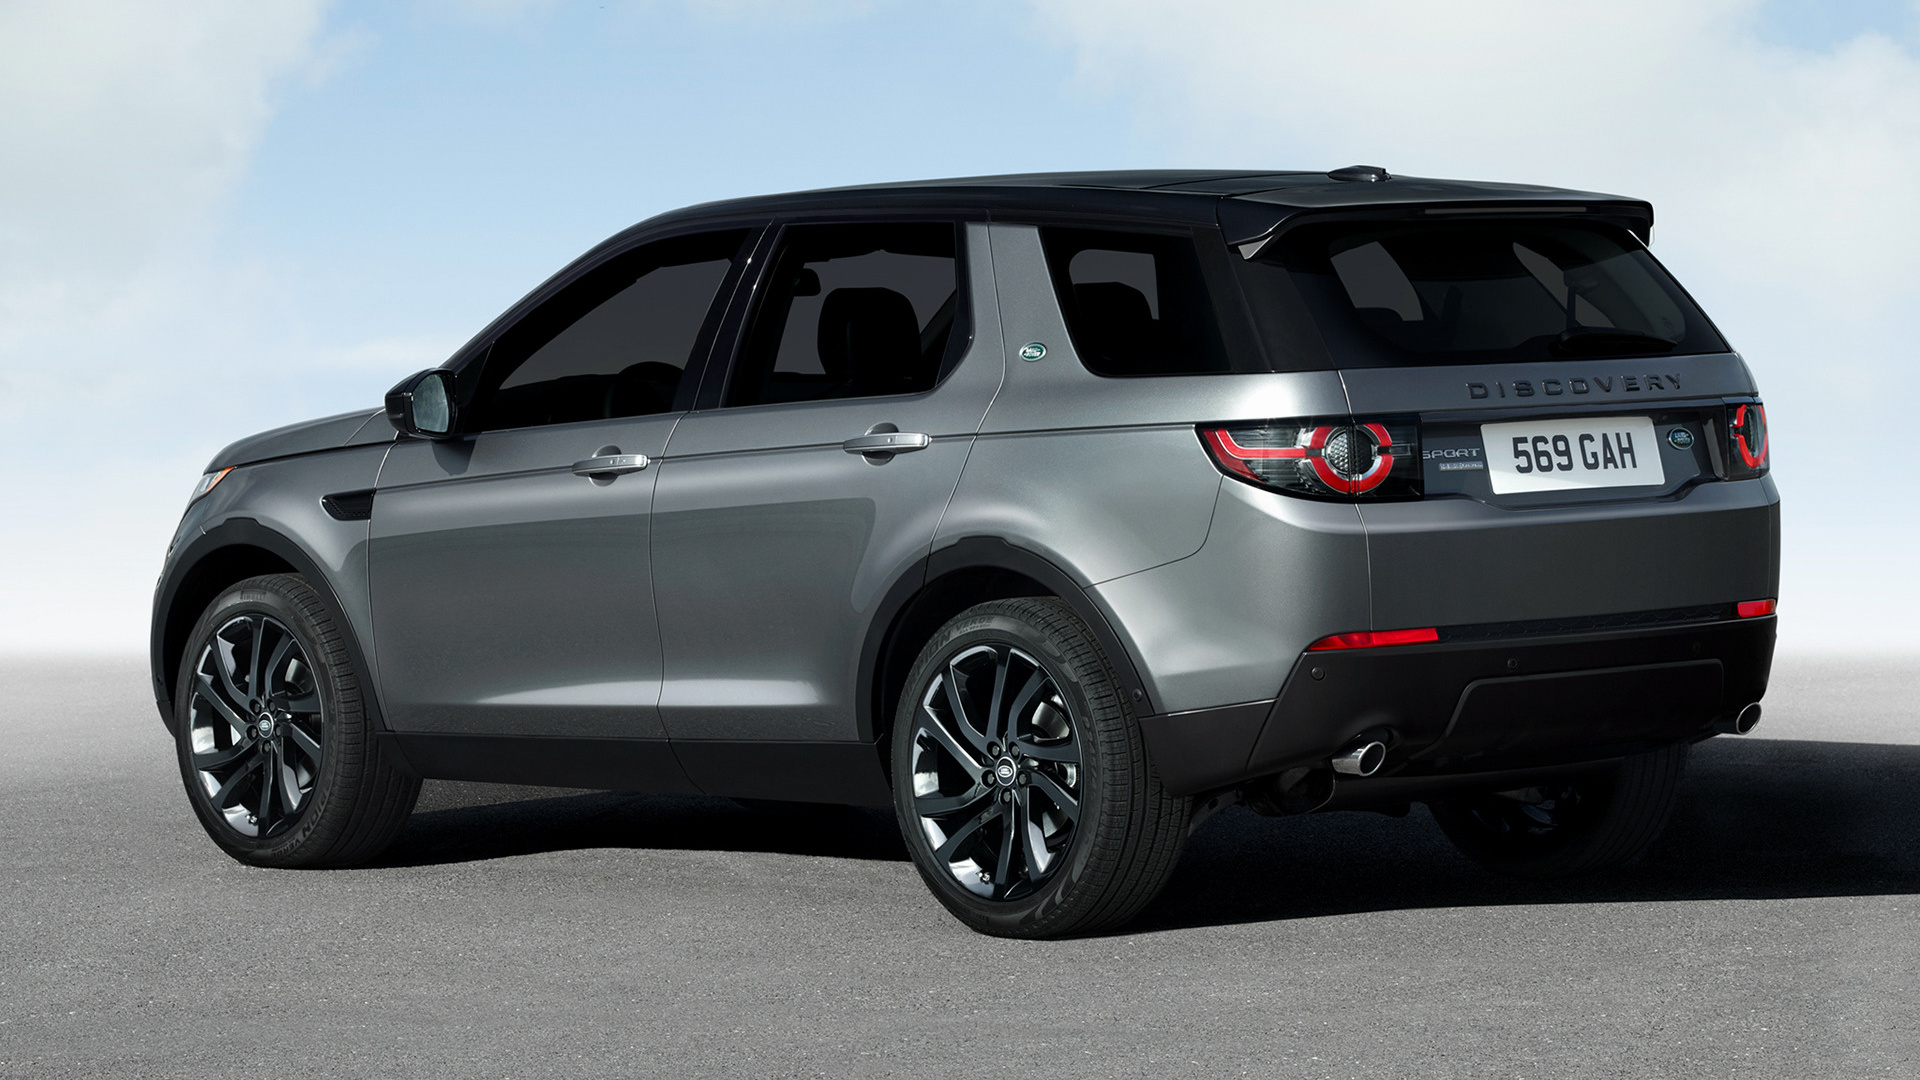 Black Car Car Crossover Car Land Rover Discovery Sport Hse Luxury Black Design Pack Luxury Car Suv S 1920x1080